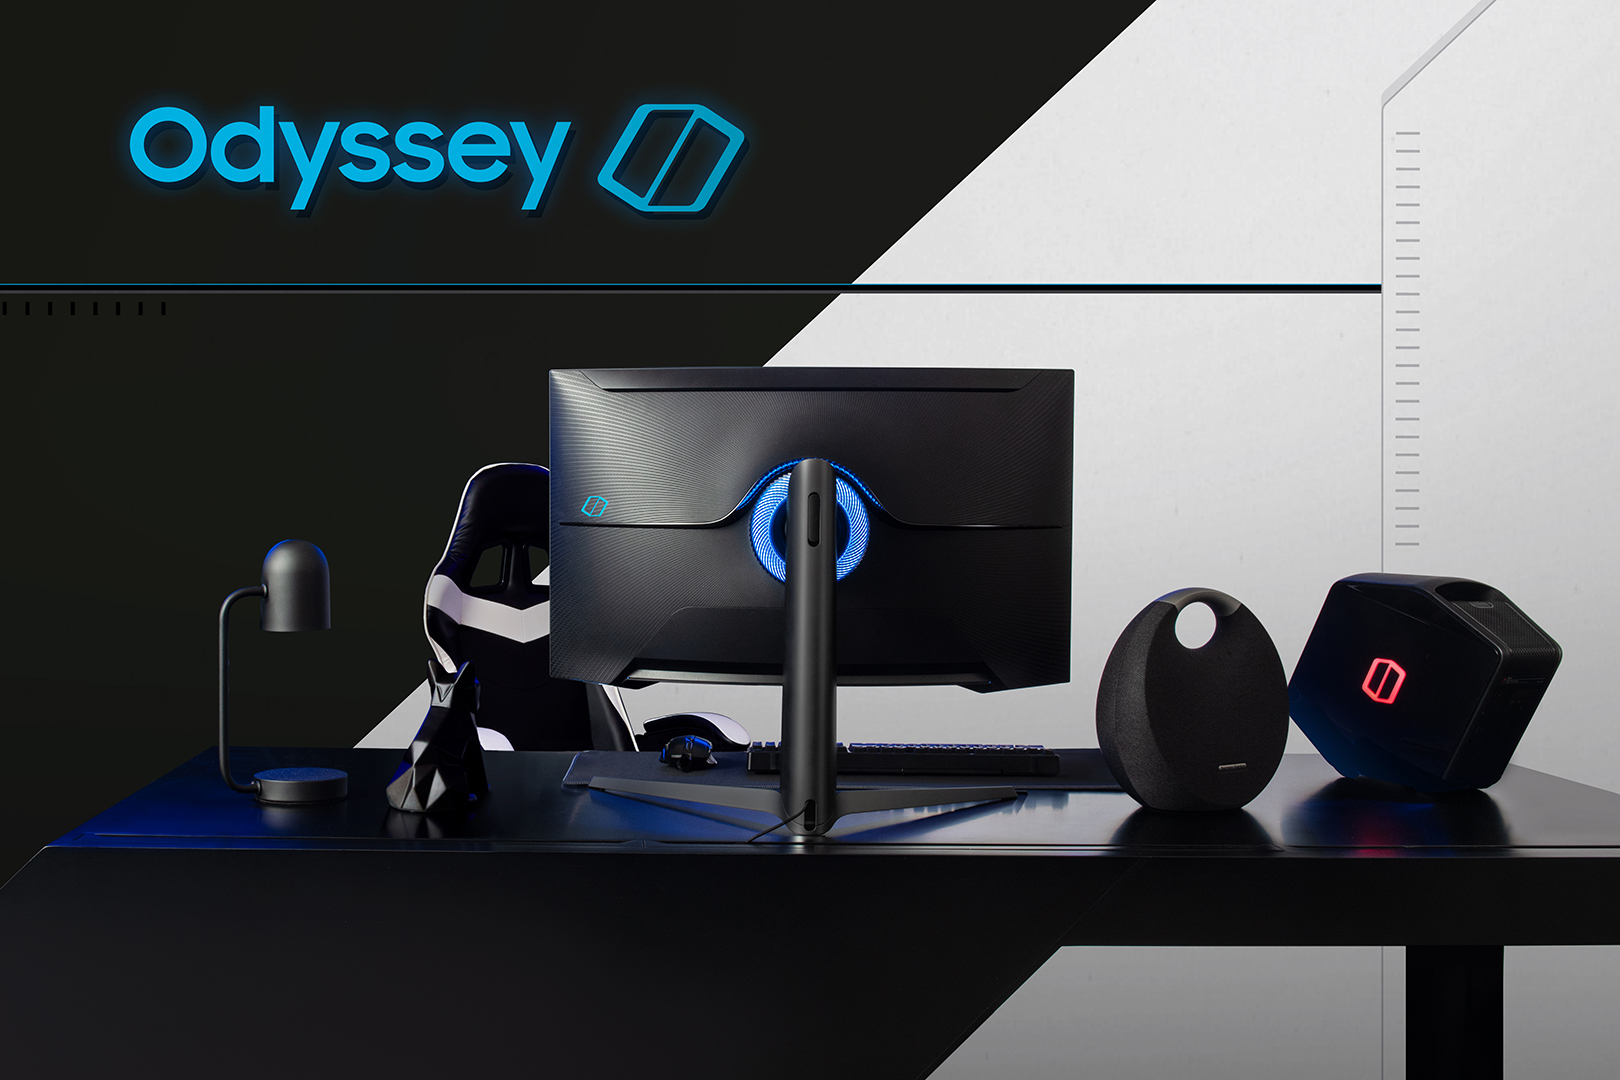 Infographic] See the Specs for the New Odyssey Ark – Samsung Global Newsroom